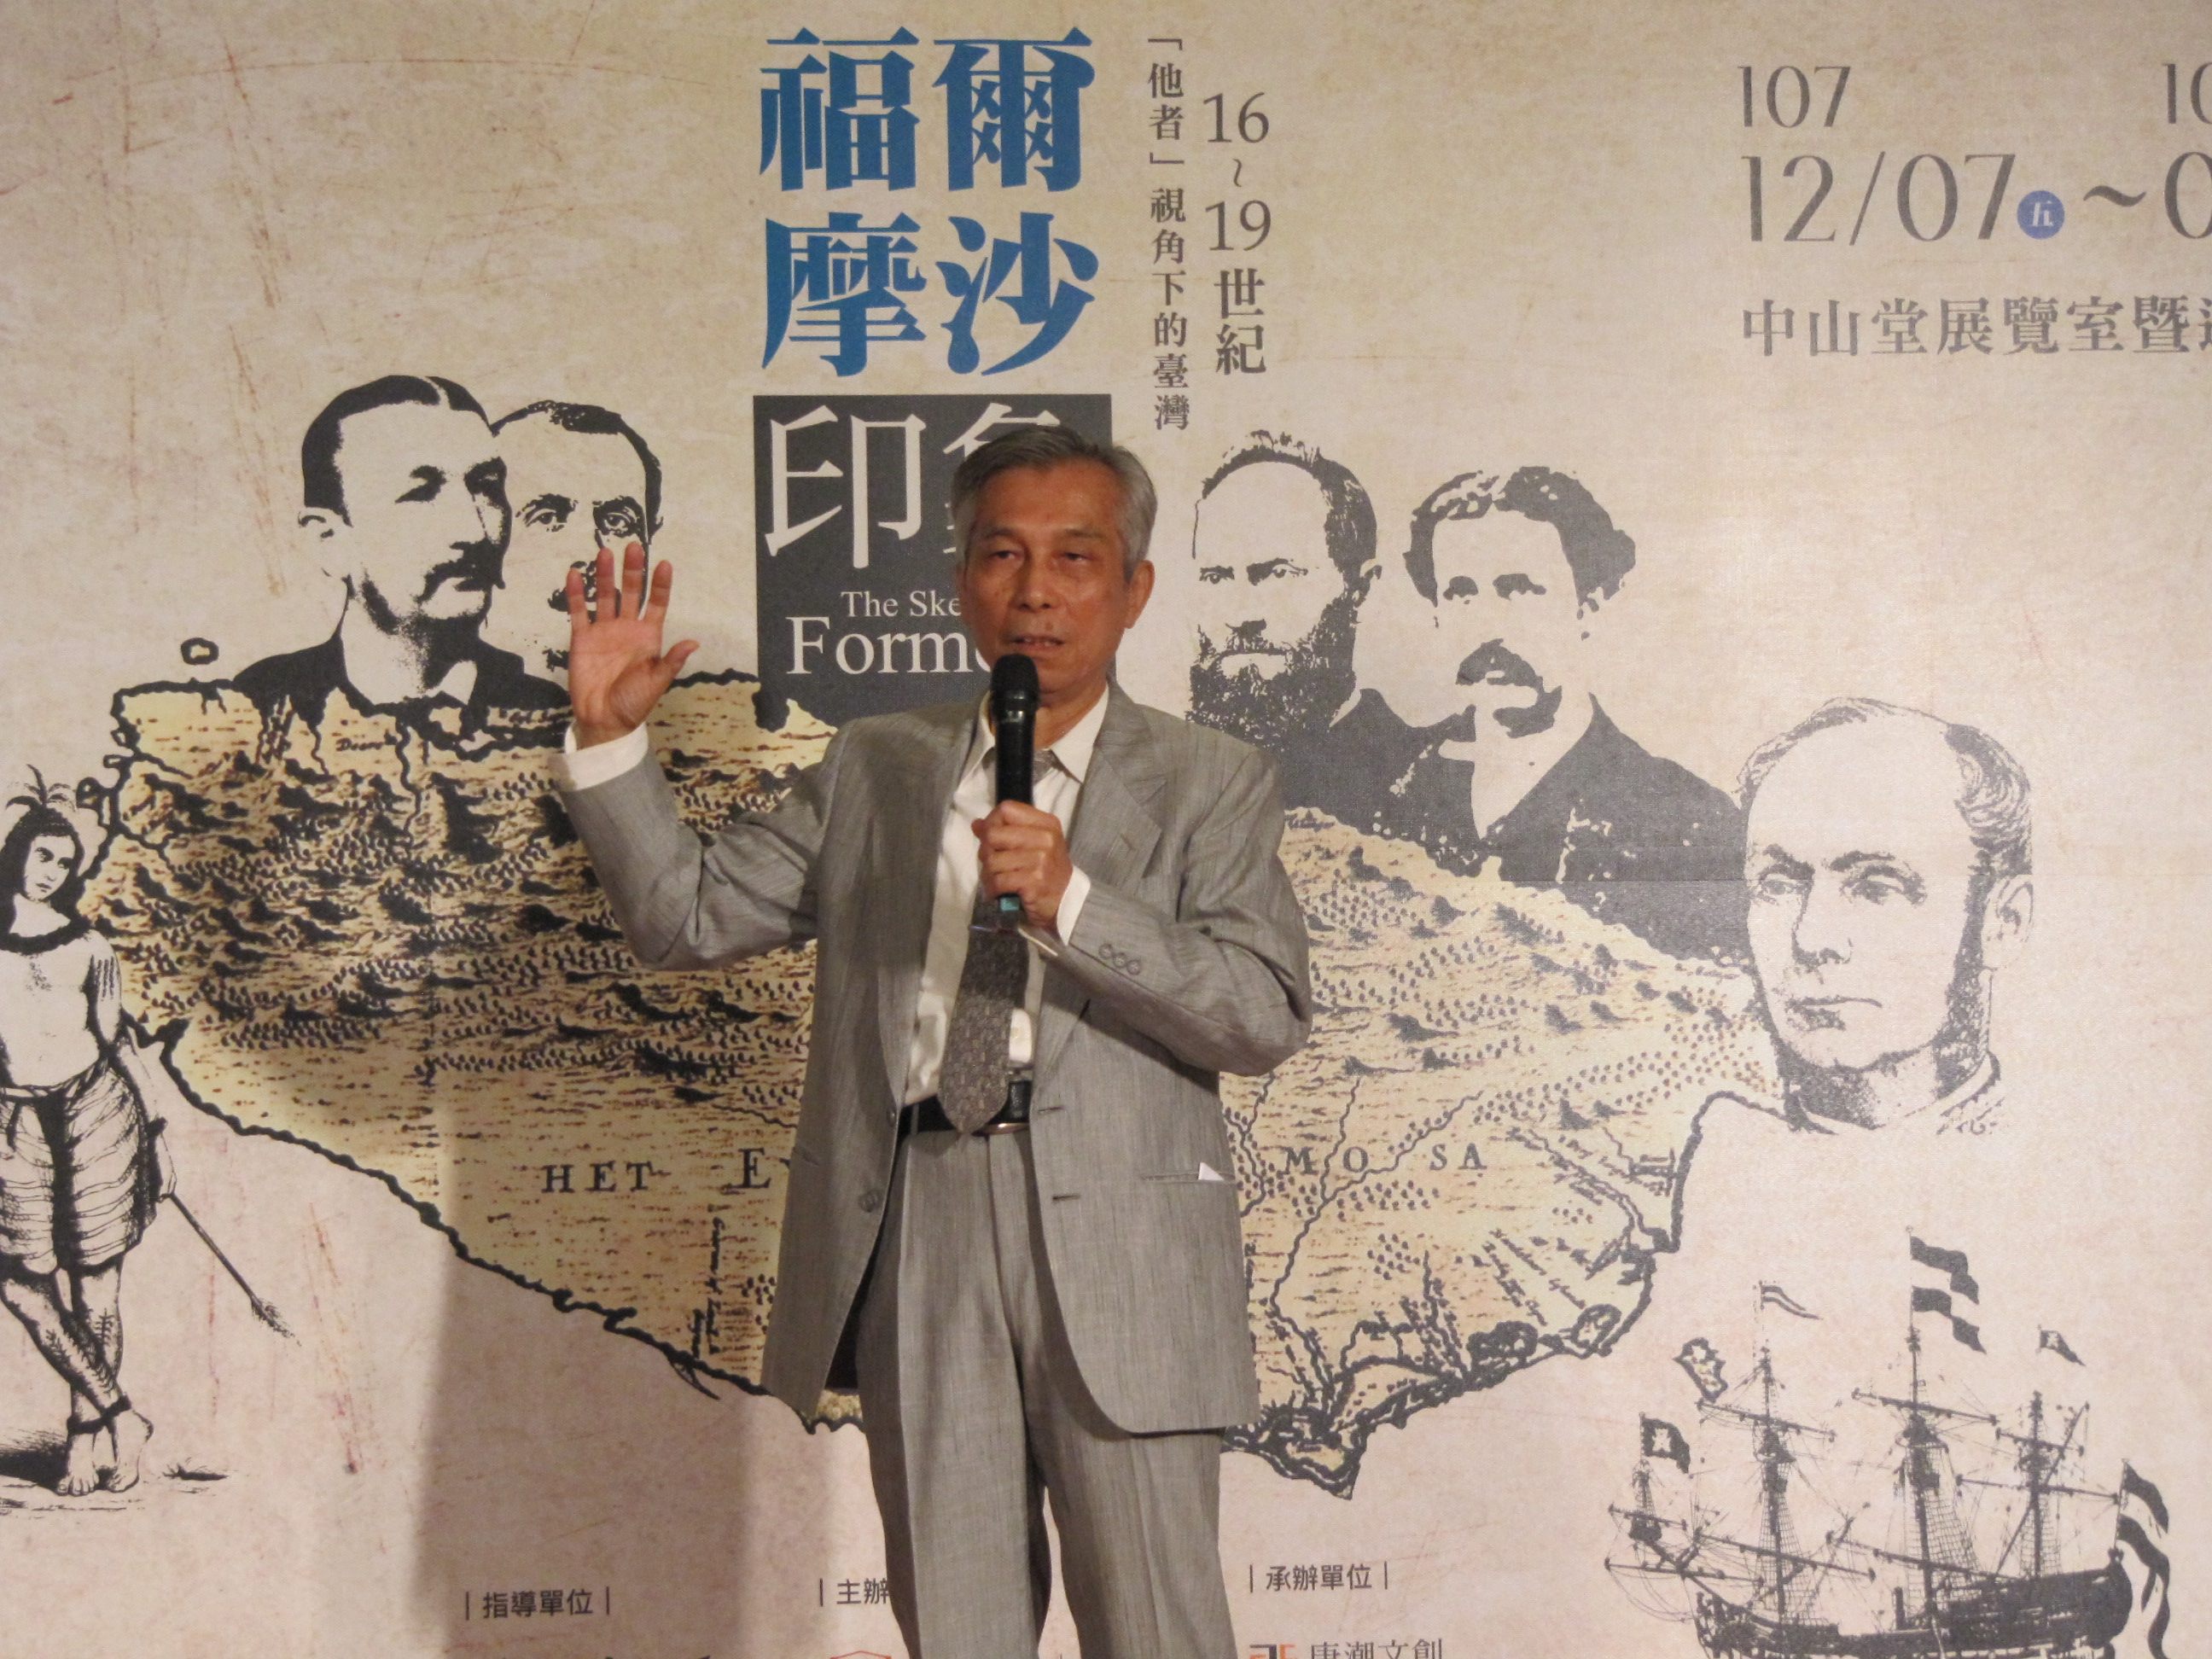 Mr. Jian Yixiong (簡義雄), a historical artifacts collector, is the exhibition curator